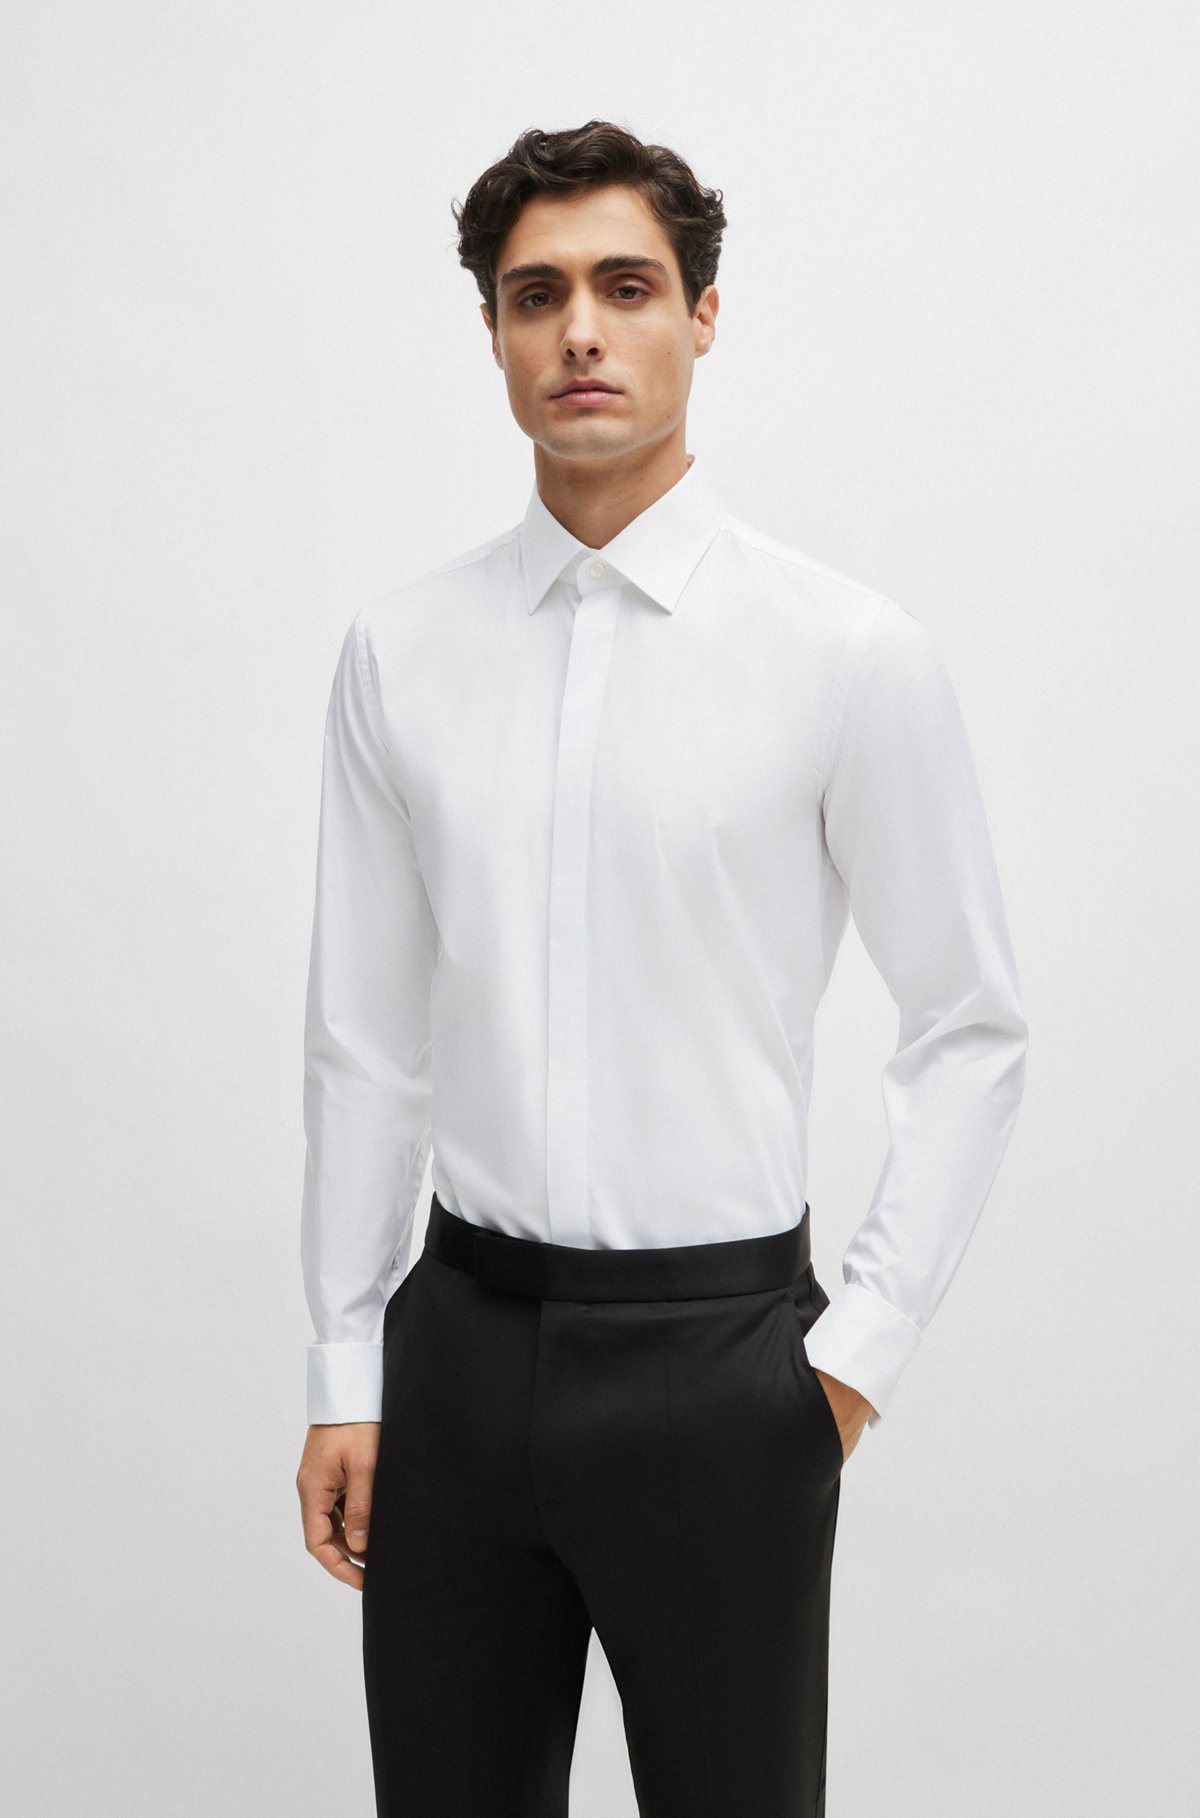 did it Susceptible to select BOSS - Slim-fit dress shirt in easy-iron stretch cotton